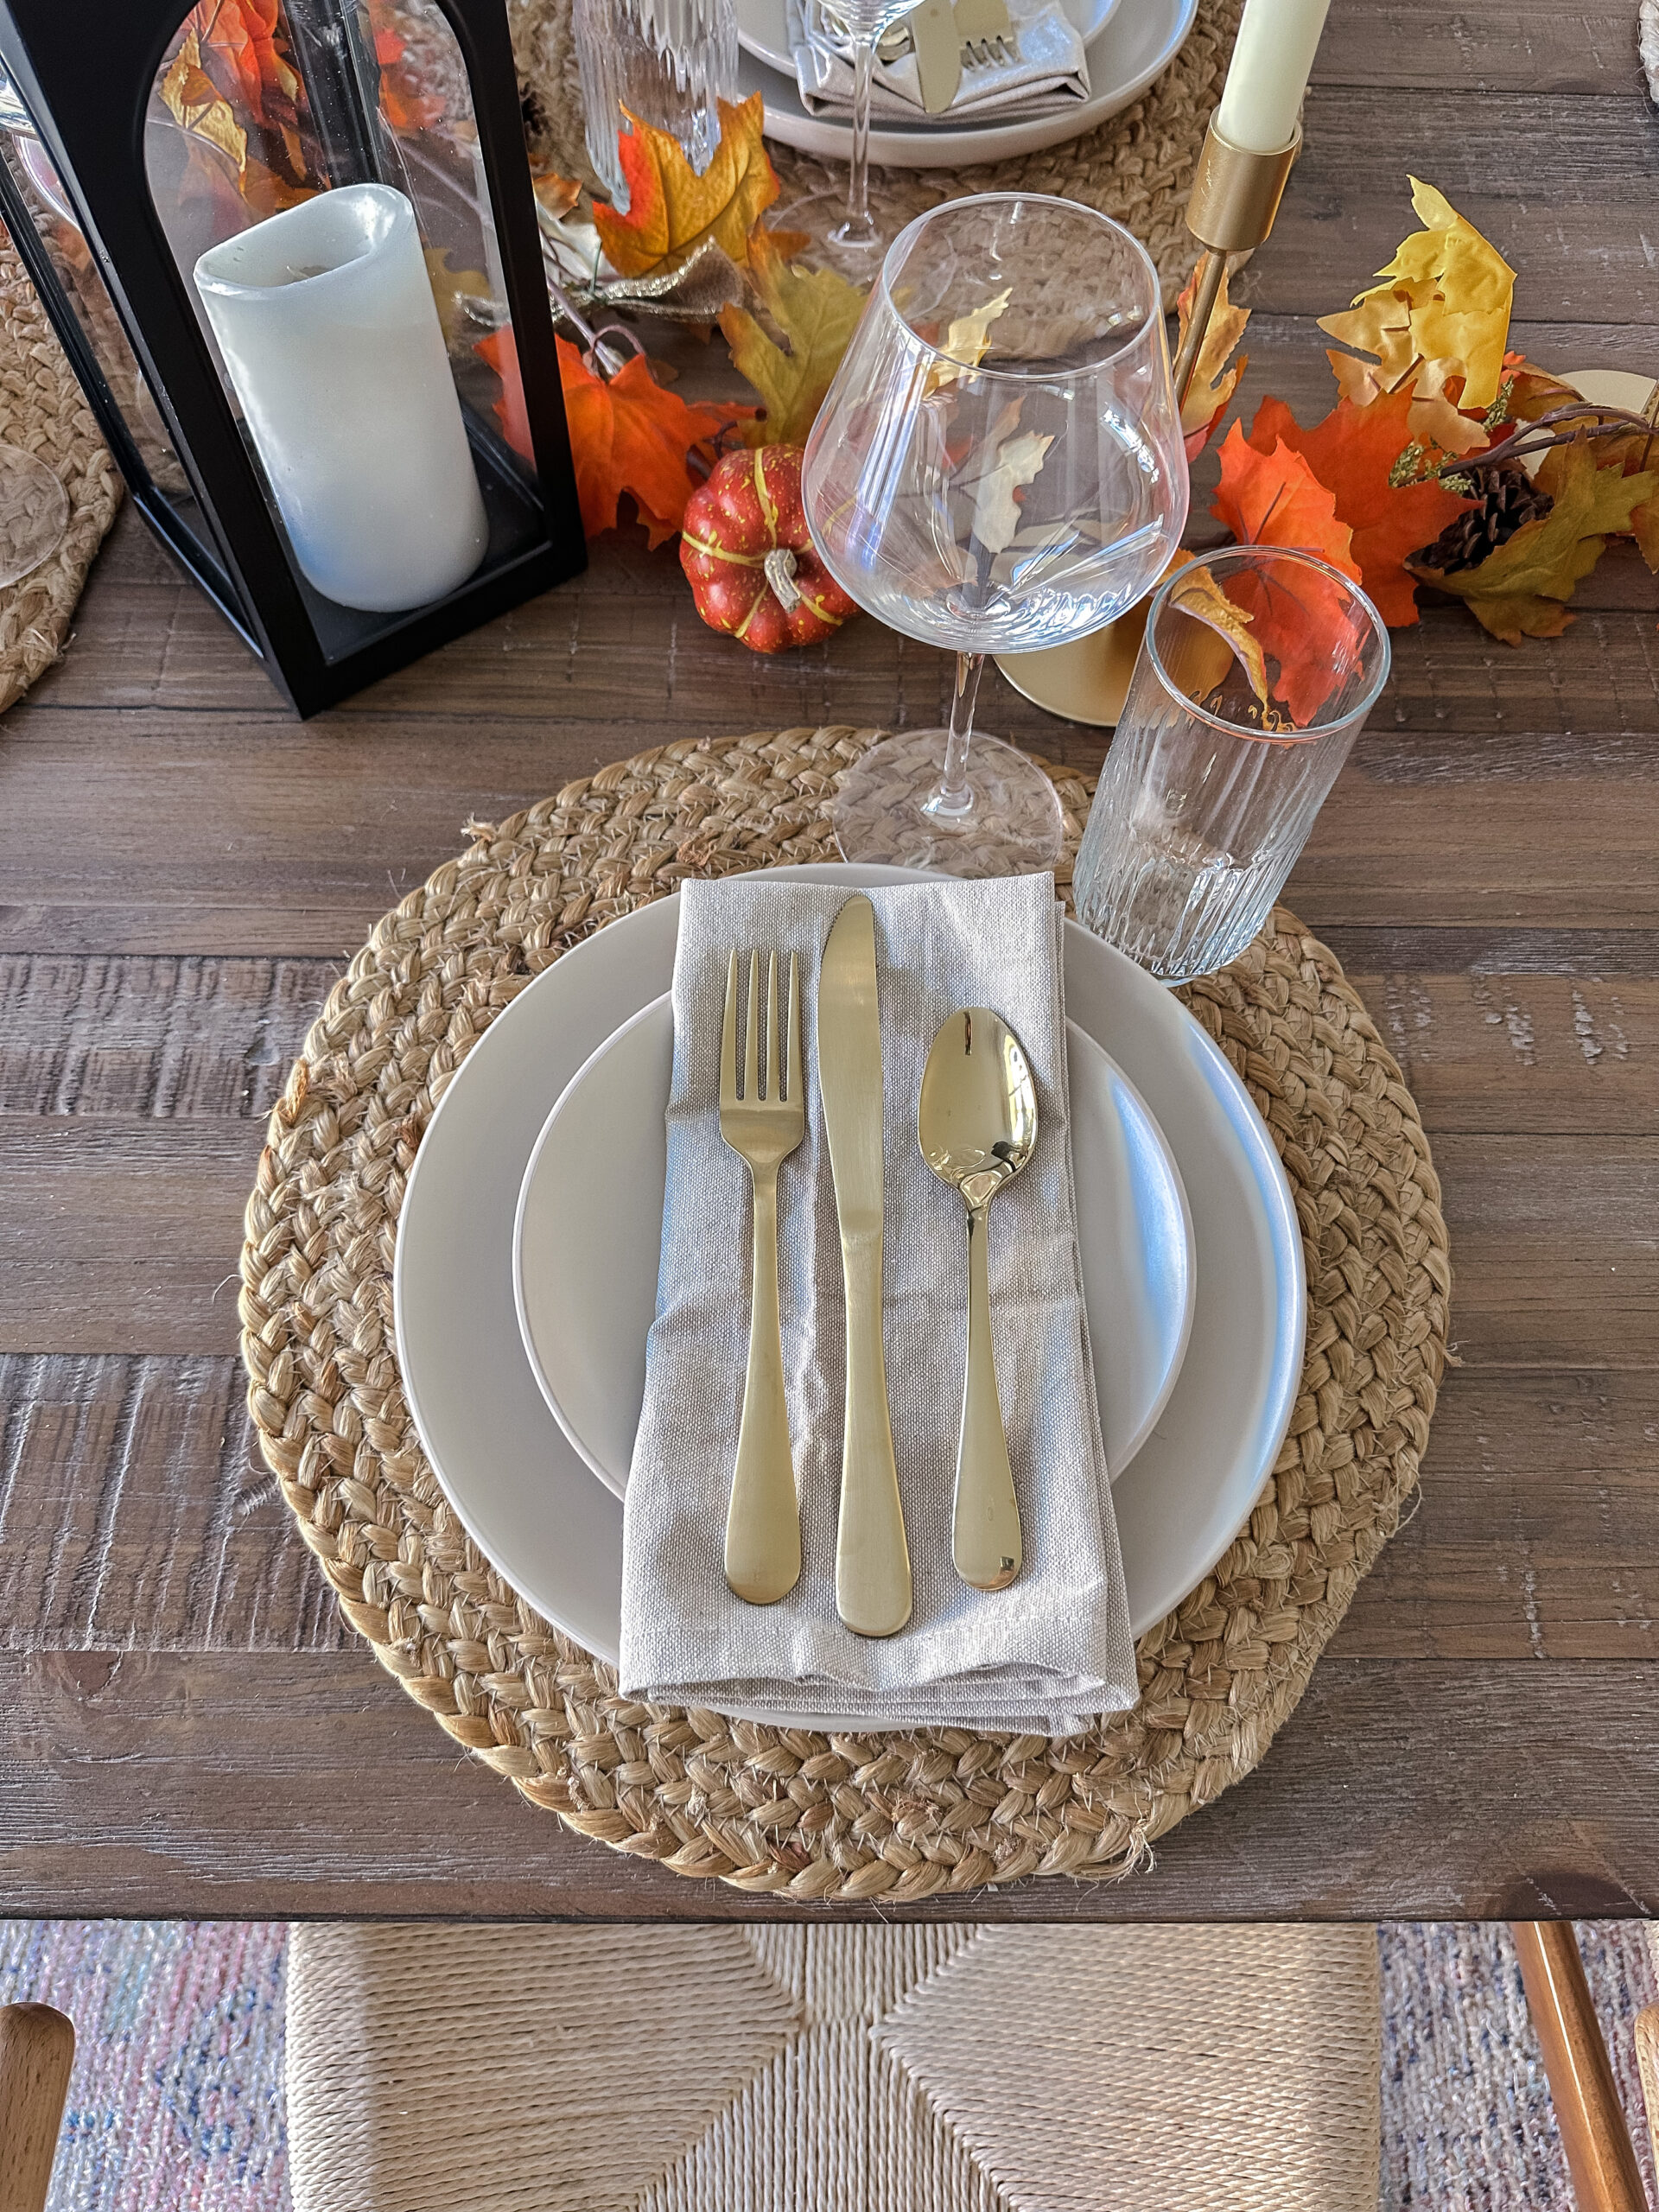 THANKSGIVING TABLE SETTING-Jaclyn De Leon style. Getting ready for thanksgiving and styling my dining room table with affordable and easy fall pieces. All items are from Walmart and can be shipped straight to your home!